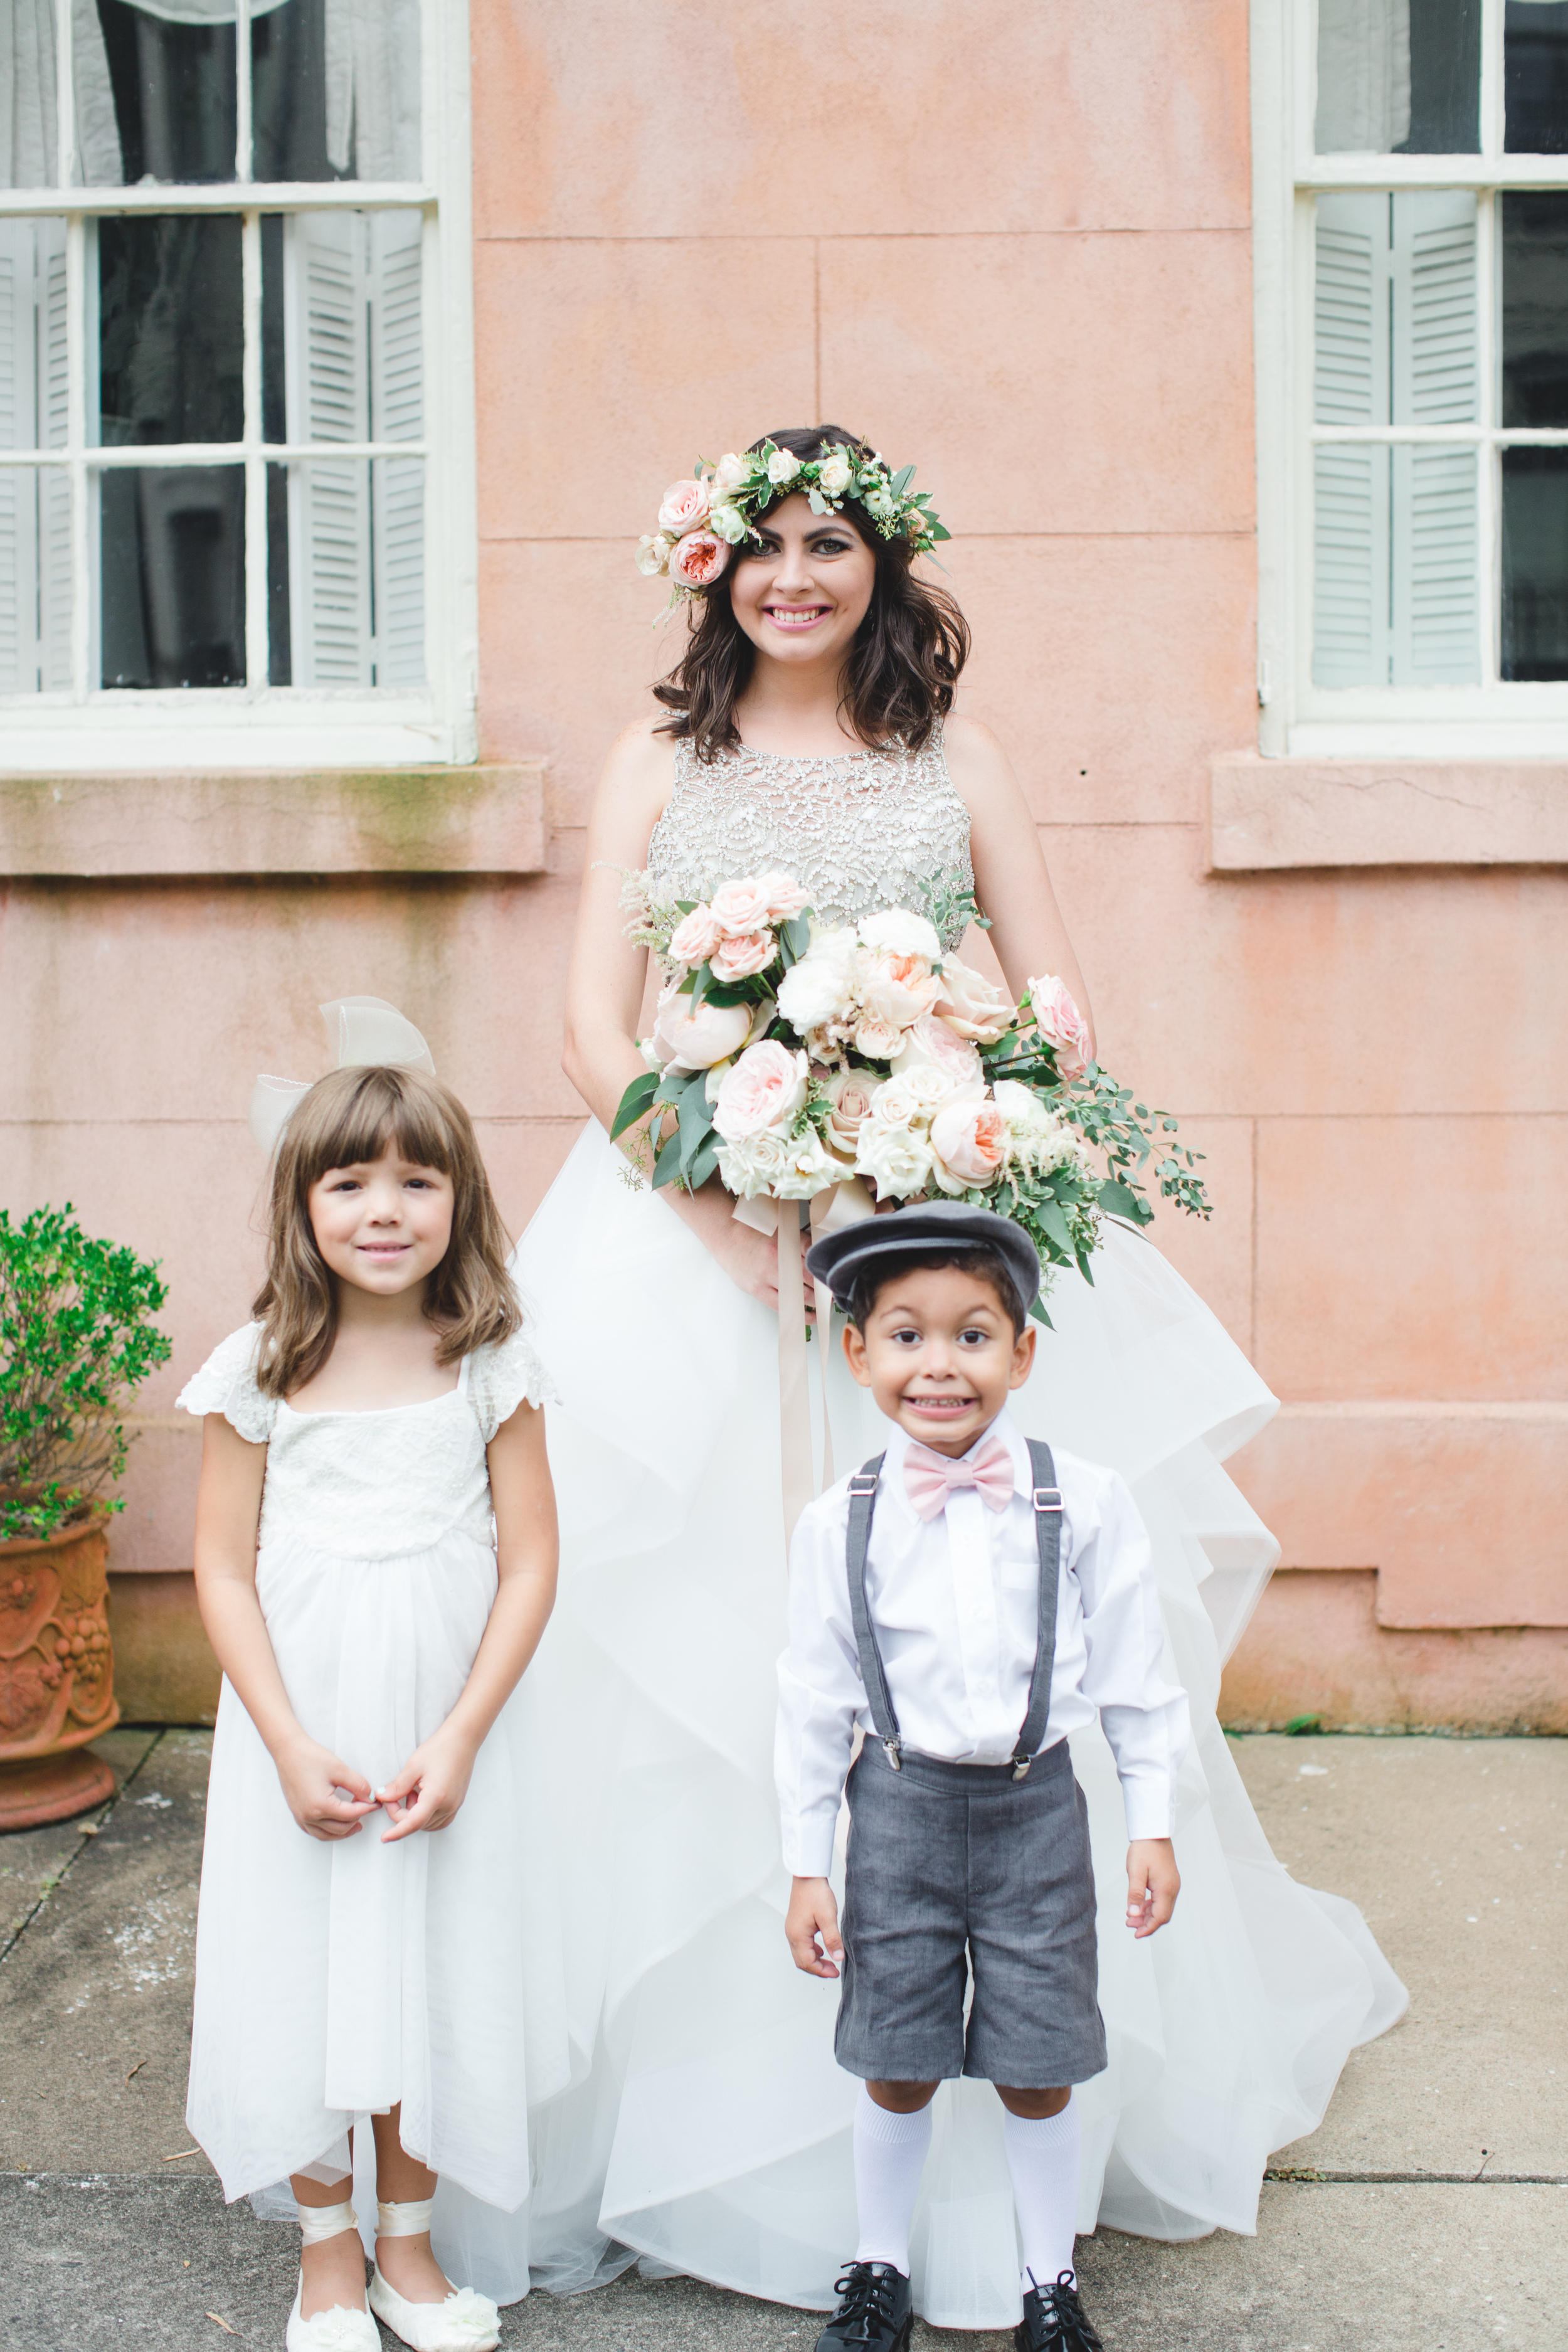 daniela-and-pedro-wedding-izzy-hudgins-photography-a-to-zinnias-whitfield-square-charles-h-morris-center-wedding-ivoyy-and-beau-bridal-boutique-dorie-hayley-paige-savannah-wedding-planner-savannah-bridal-boutique-savannah-weddings-12.jpg